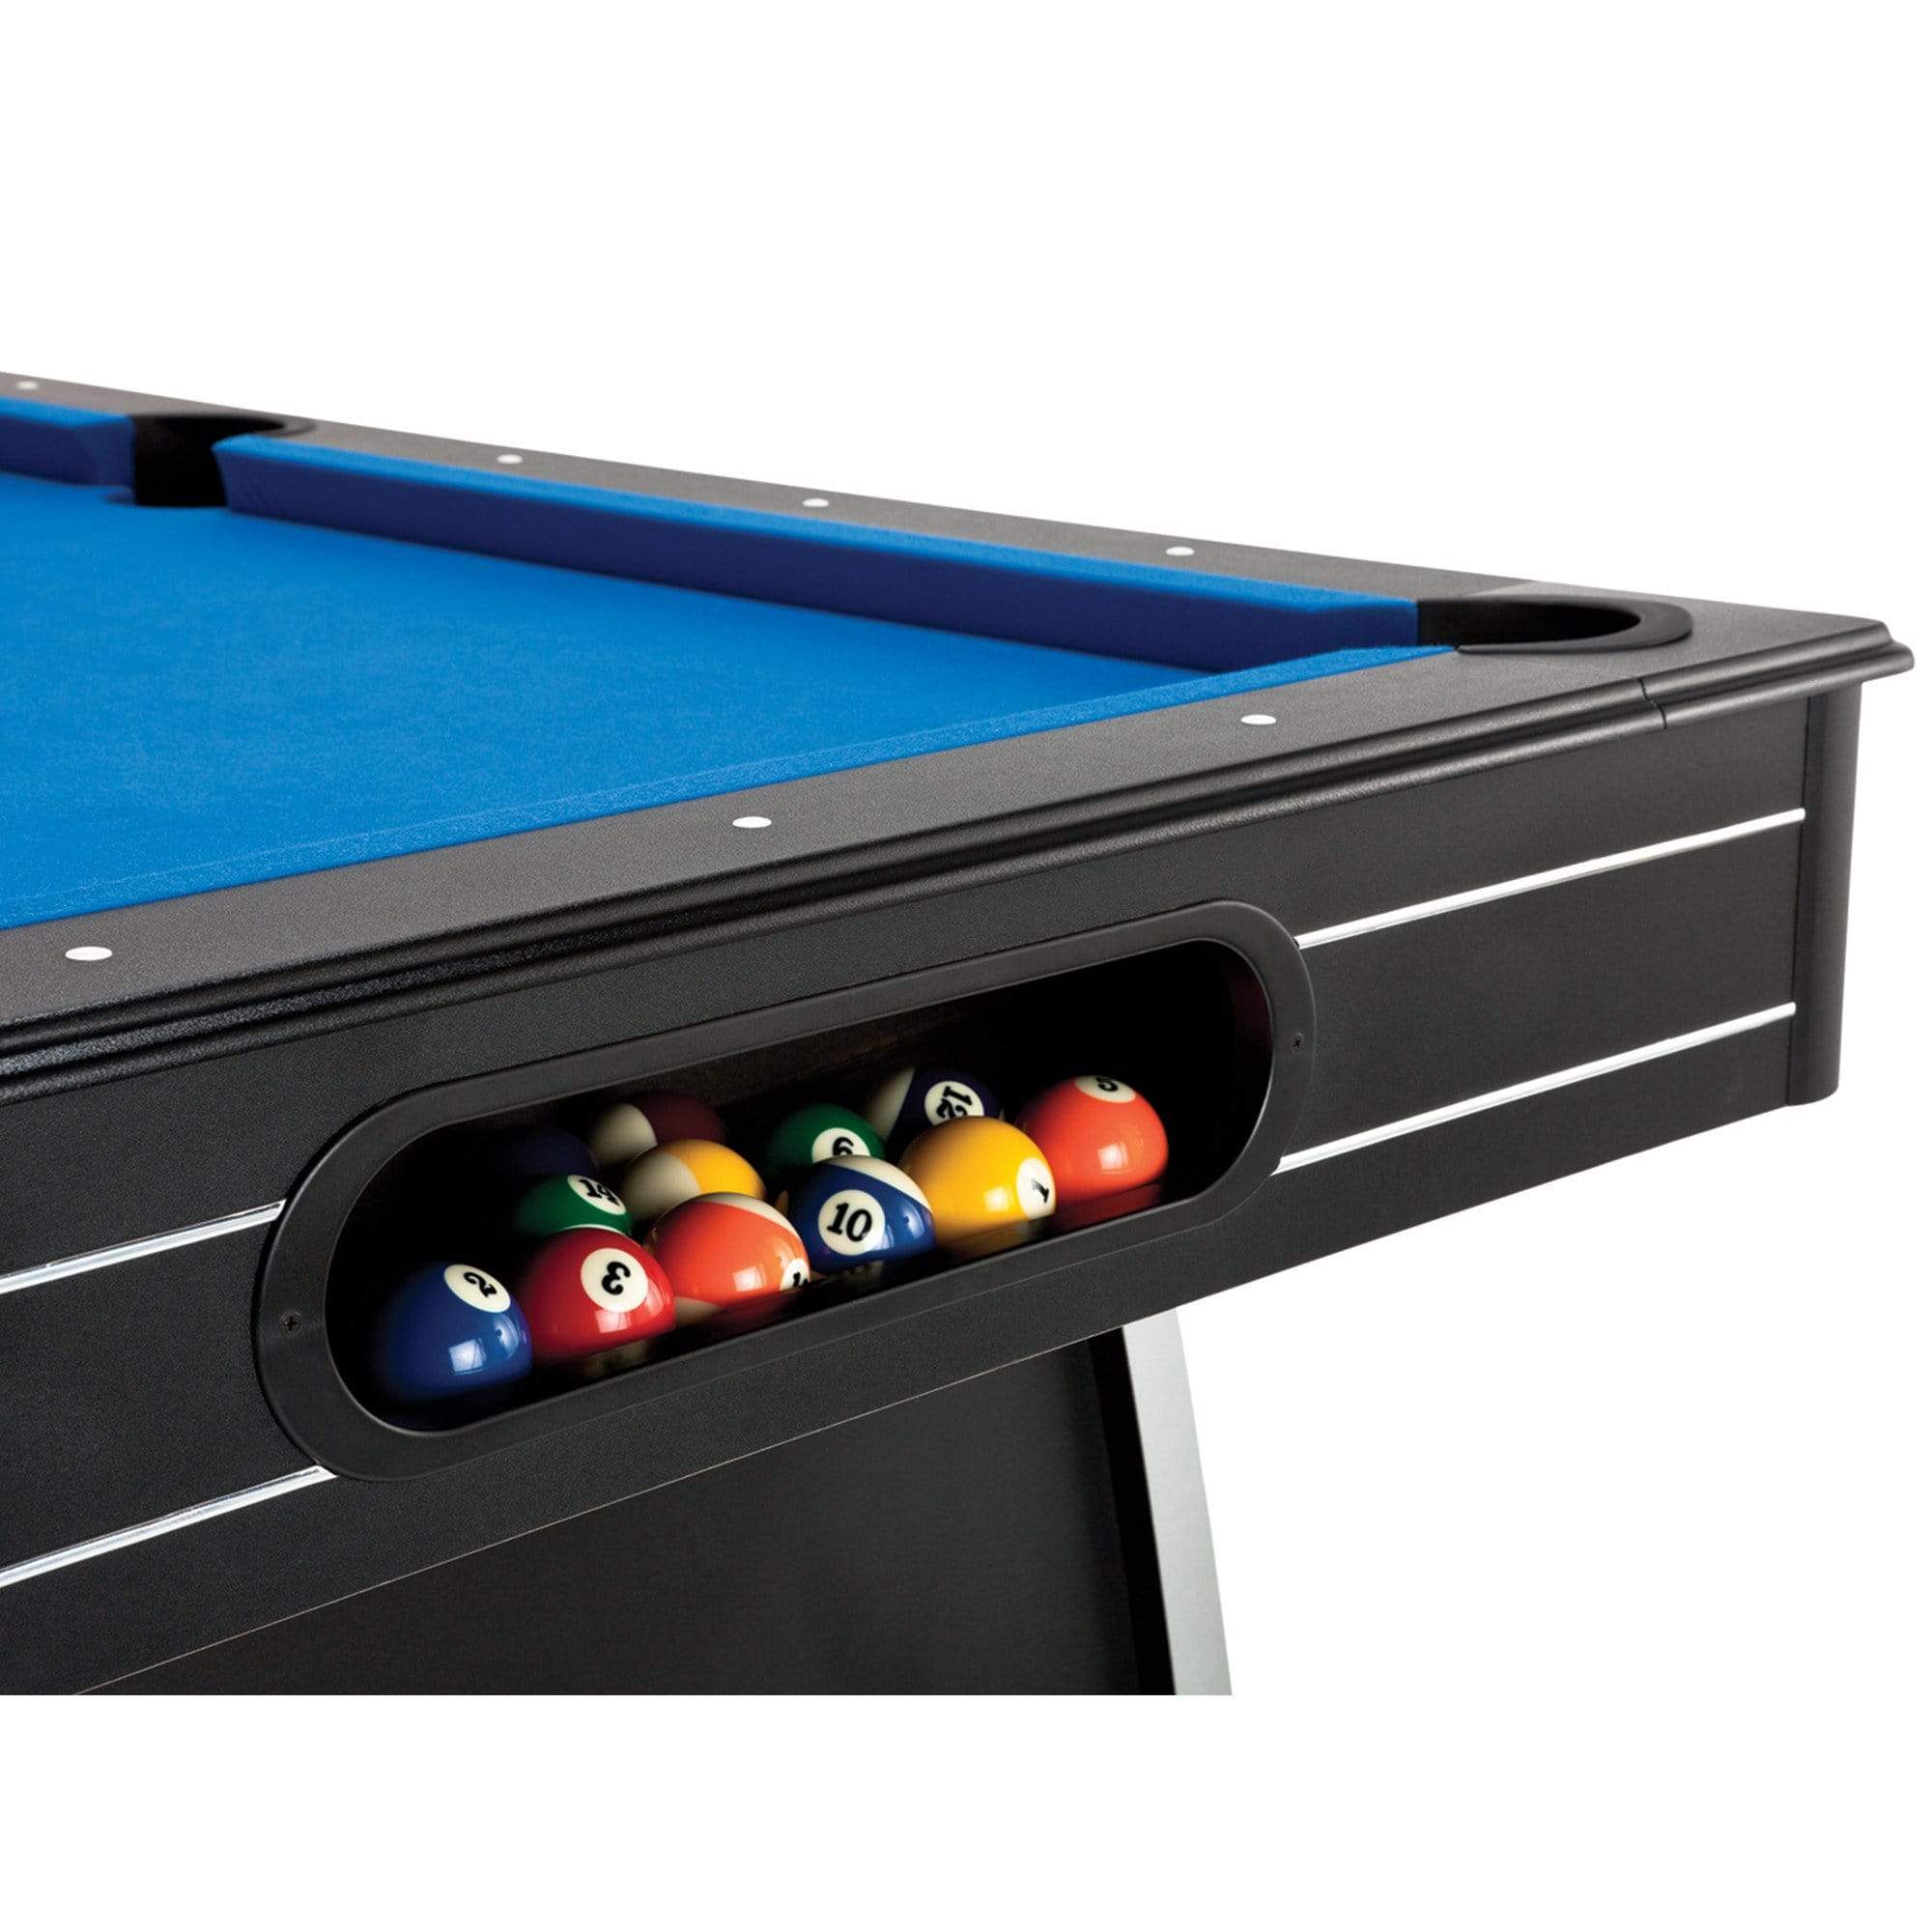 Fat Cat Pool Table Blue / As shown Fat Cat Tucson 7' Pool Table with Ball Return